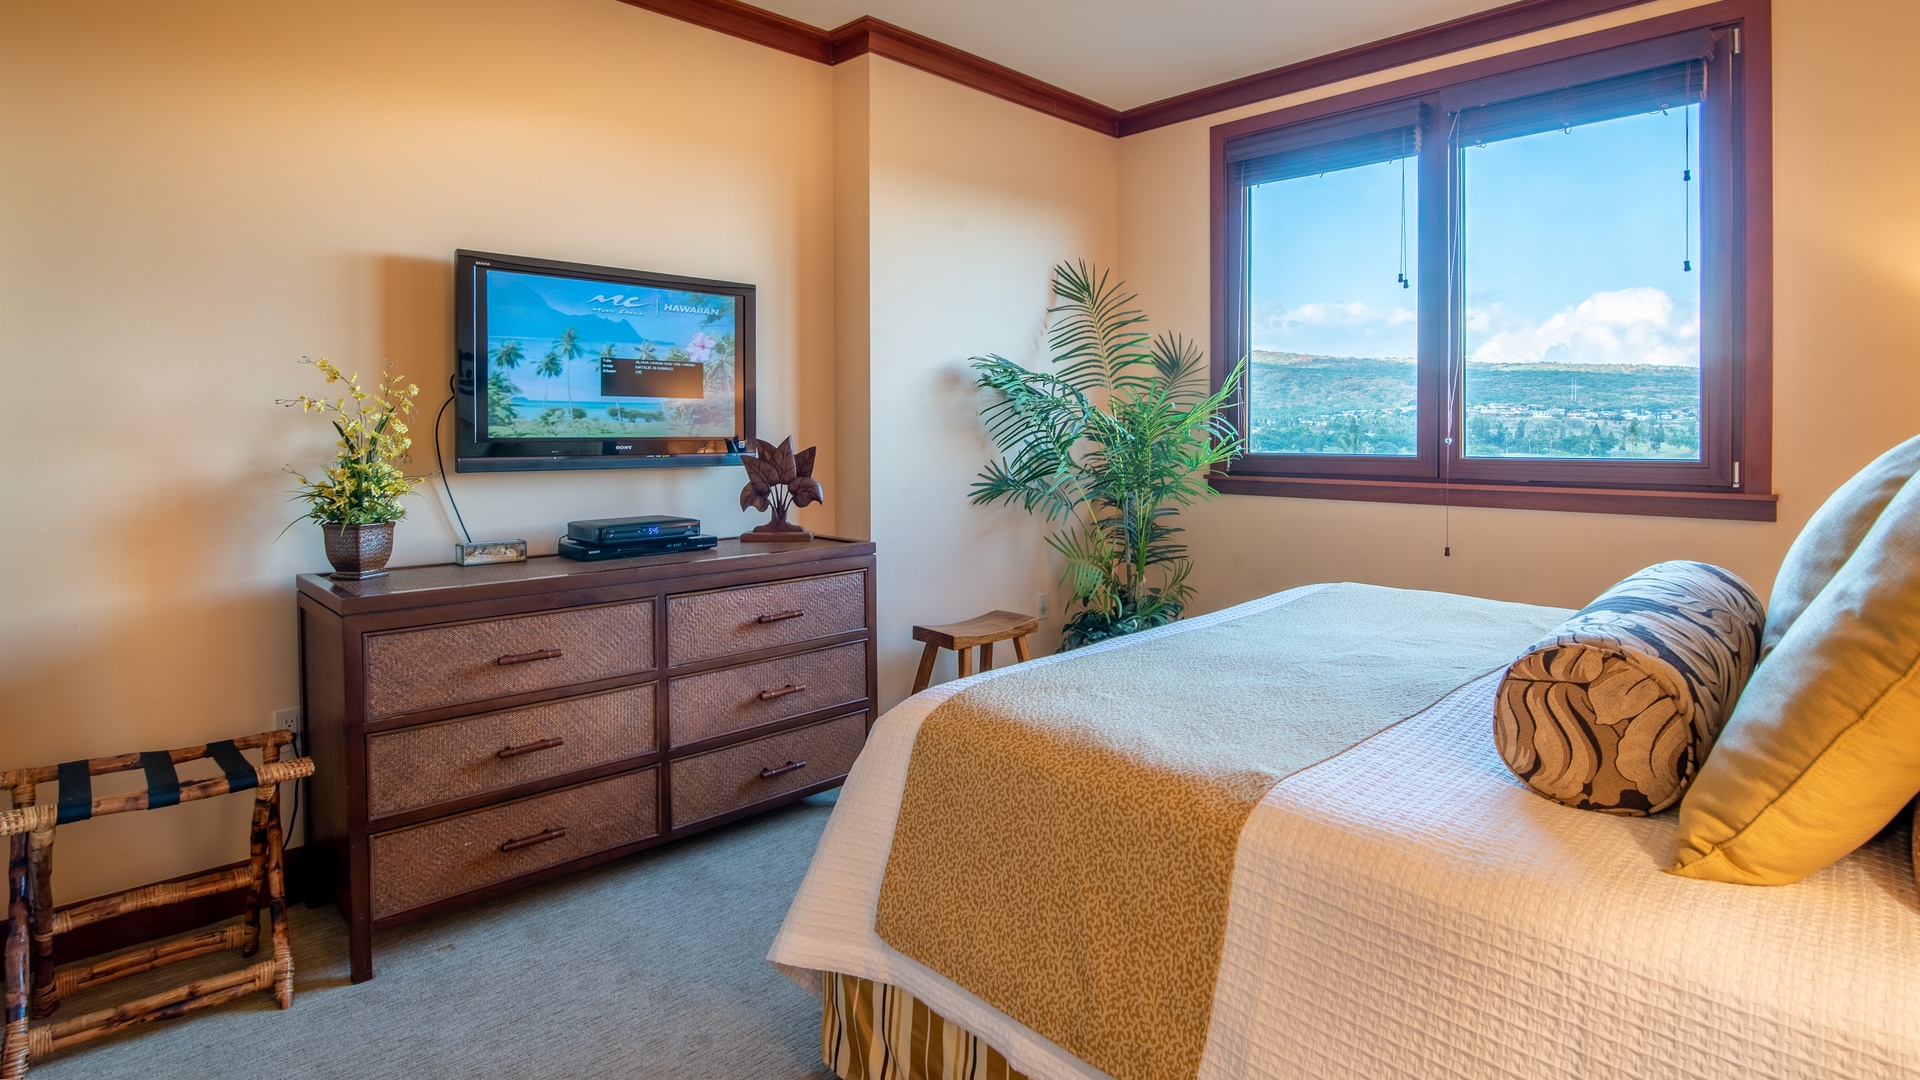 Kapolei Vacation Rentals, Ko Olina Beach Villas O603 - Relax in a spacious primary guest bedroom with a TV and views.